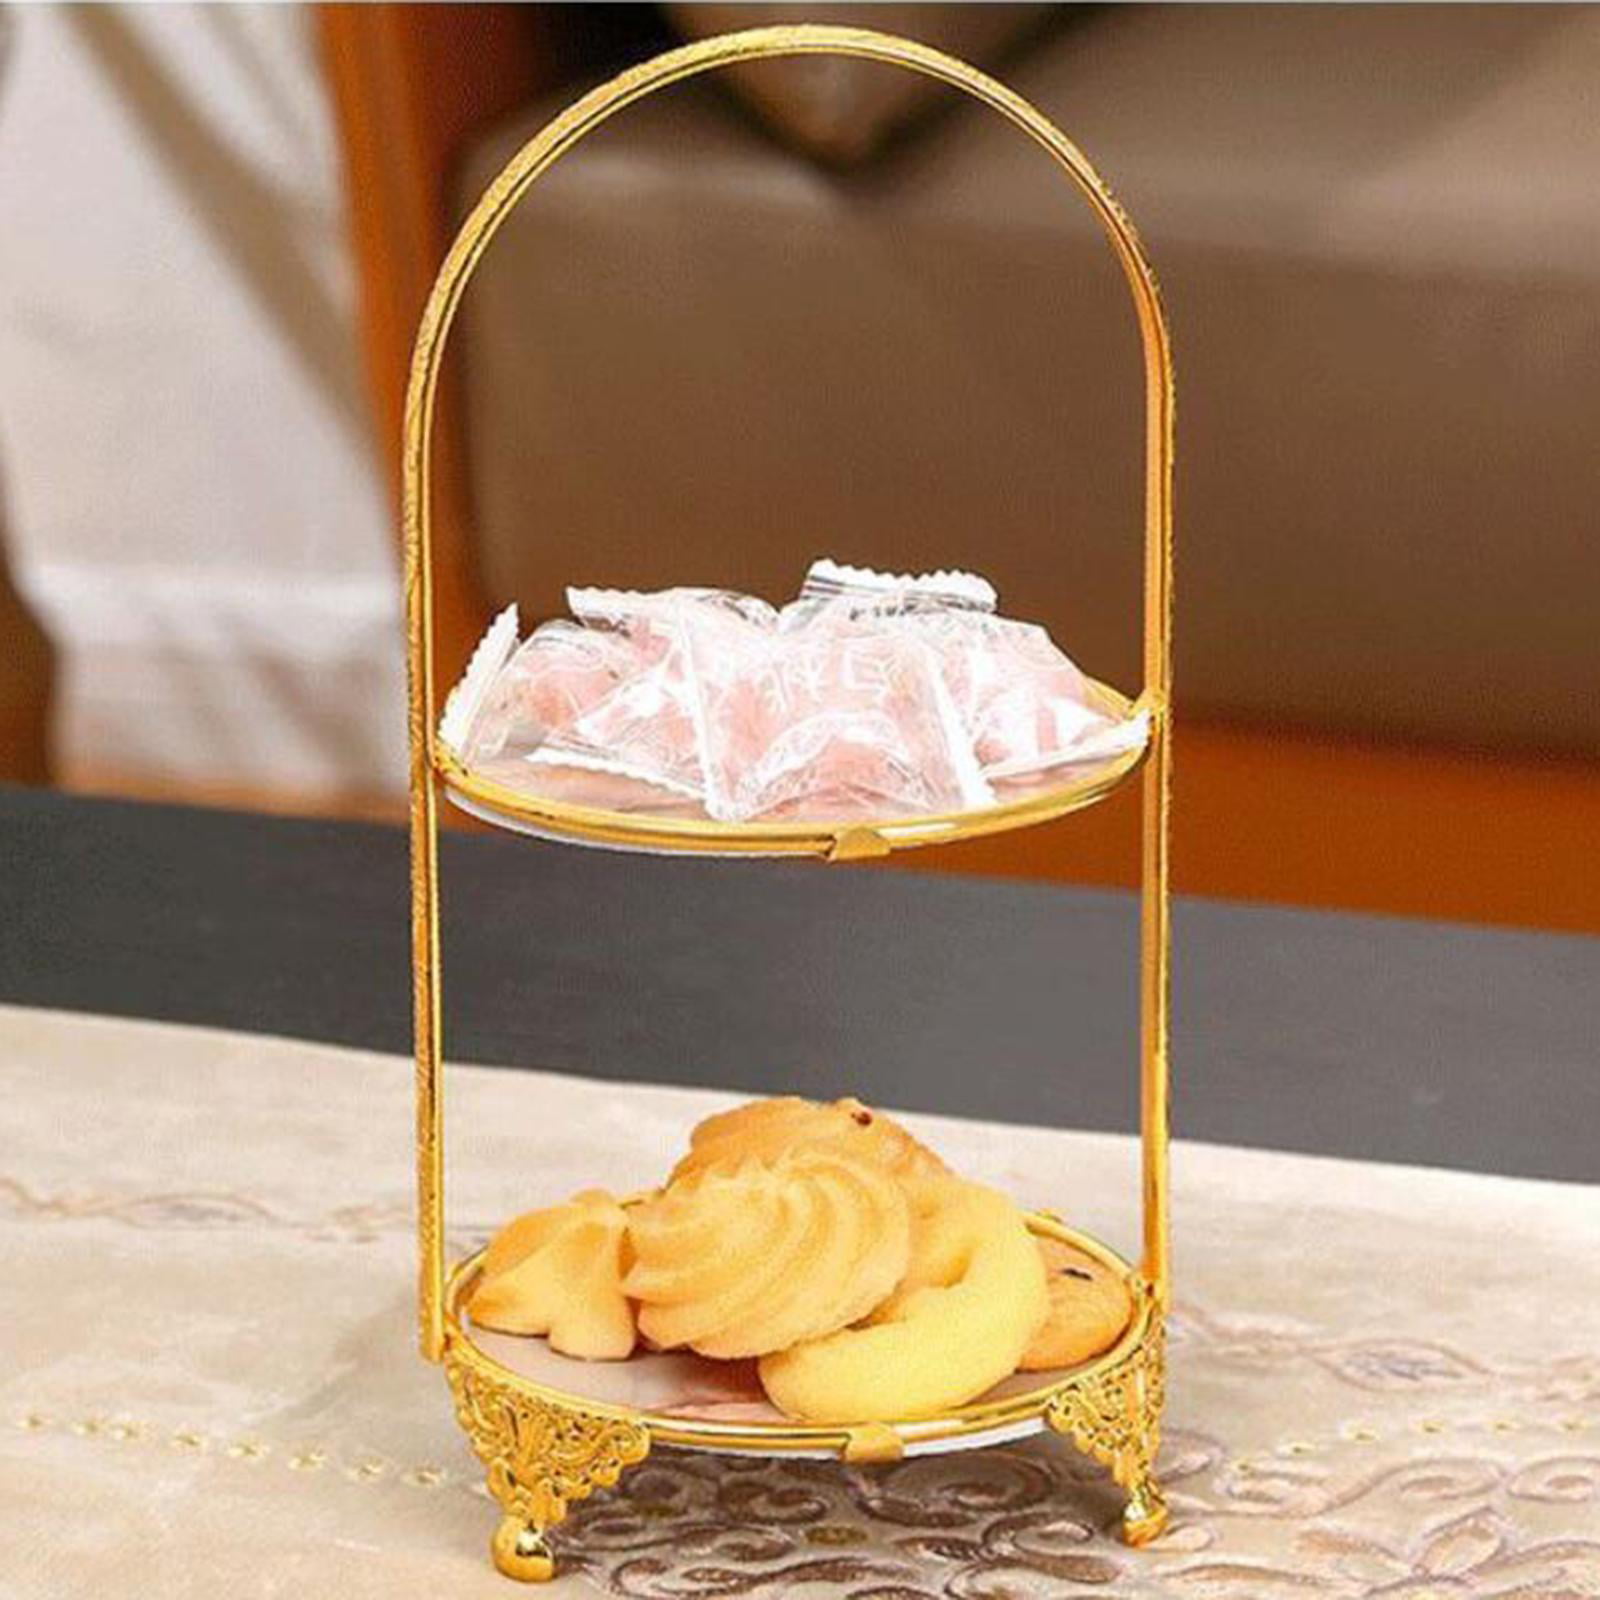 New Iron Plate Support Tea Cake Rack Pictures Stand Decorative